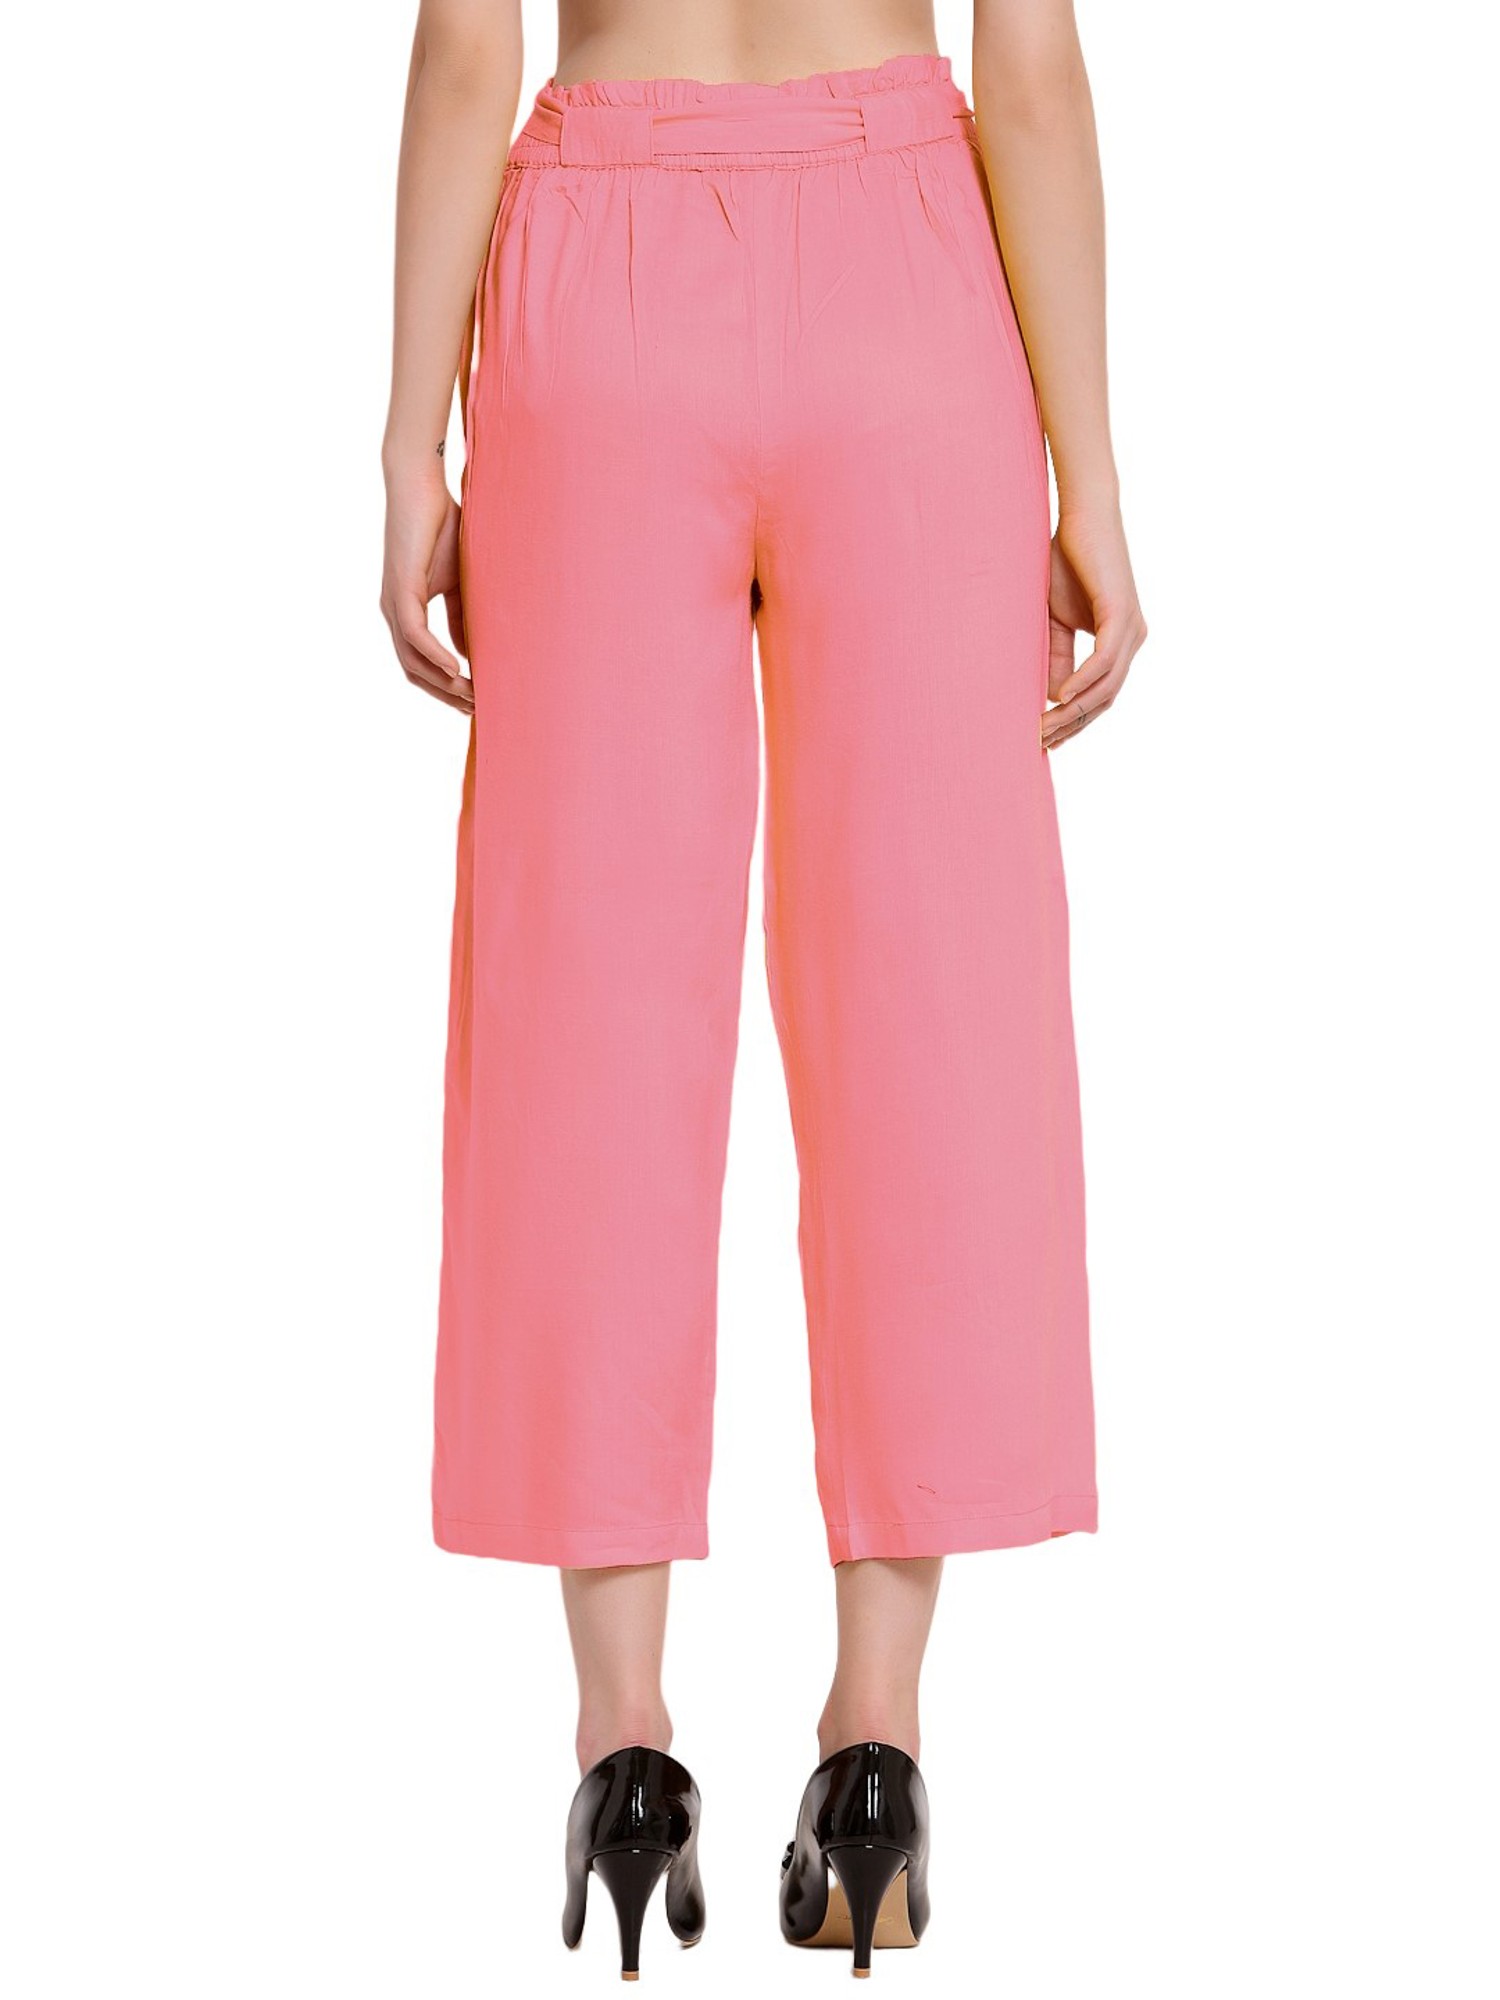 Wholesale Spring Summer Trending Elegant Pleated Pink Office Work Trousers  Loose Palazzo WomenS Pants From malibabacom